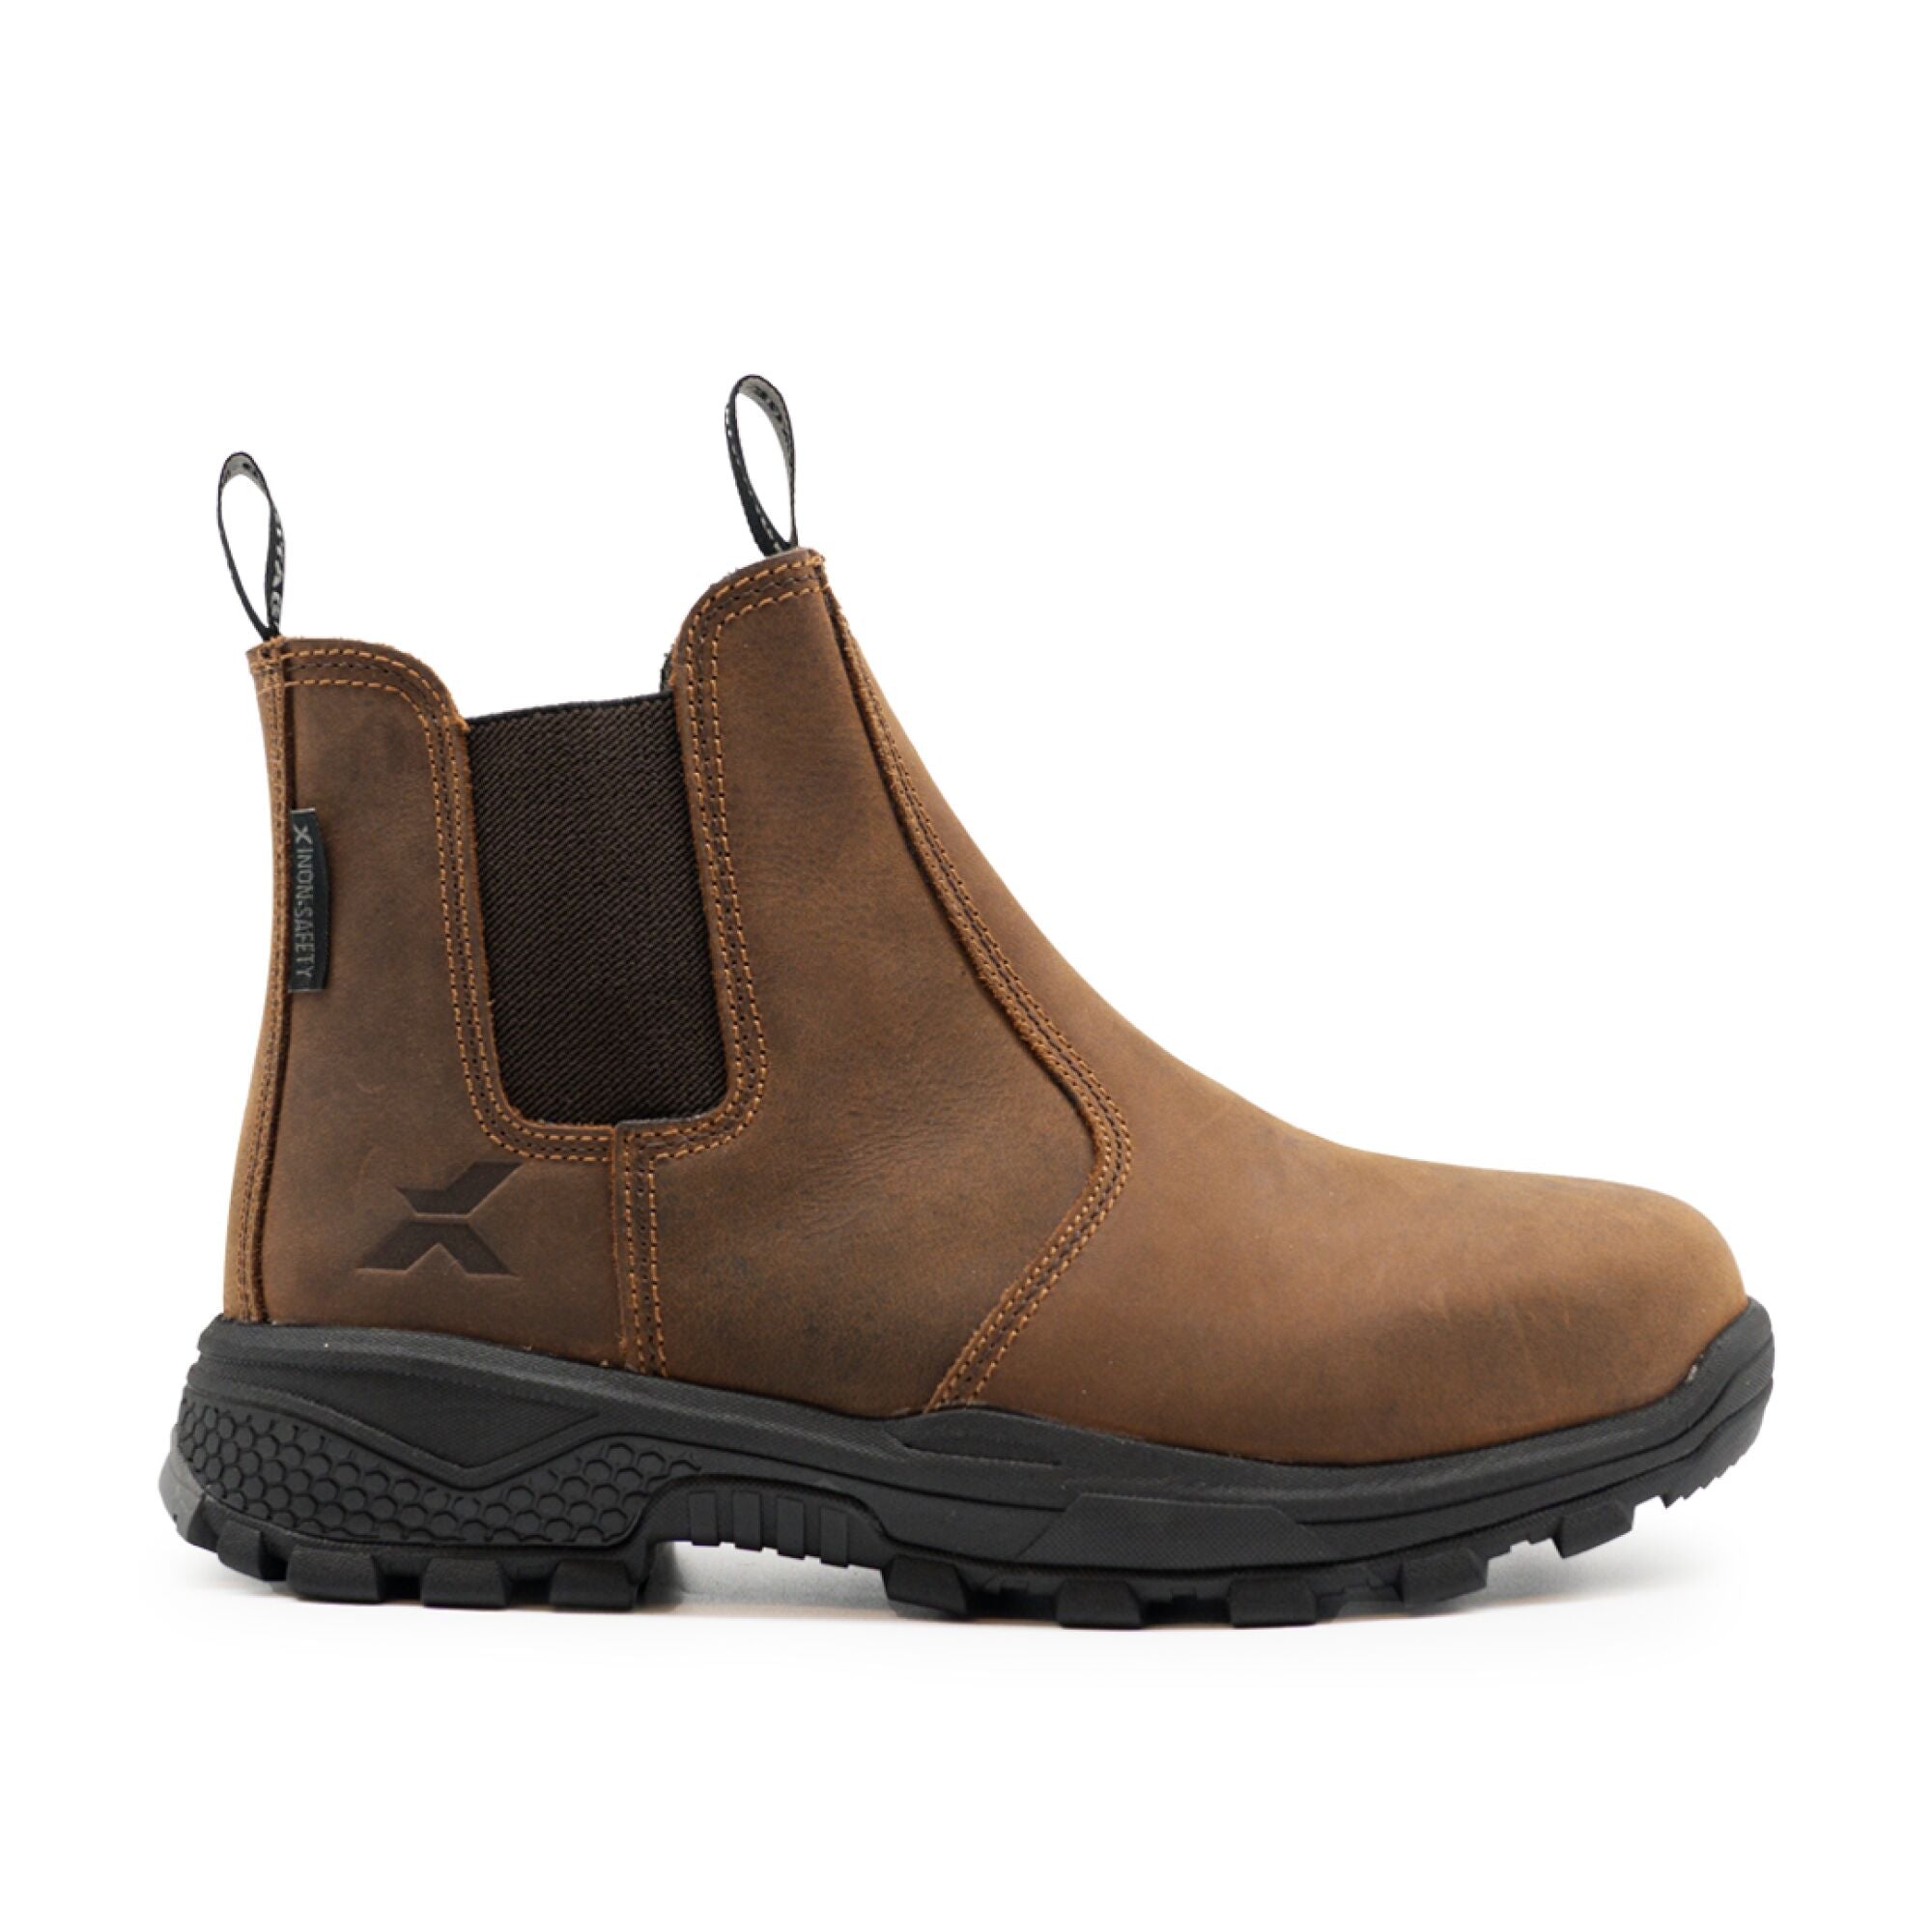 Xpert Heritage Dealer Safety Boot - Brown